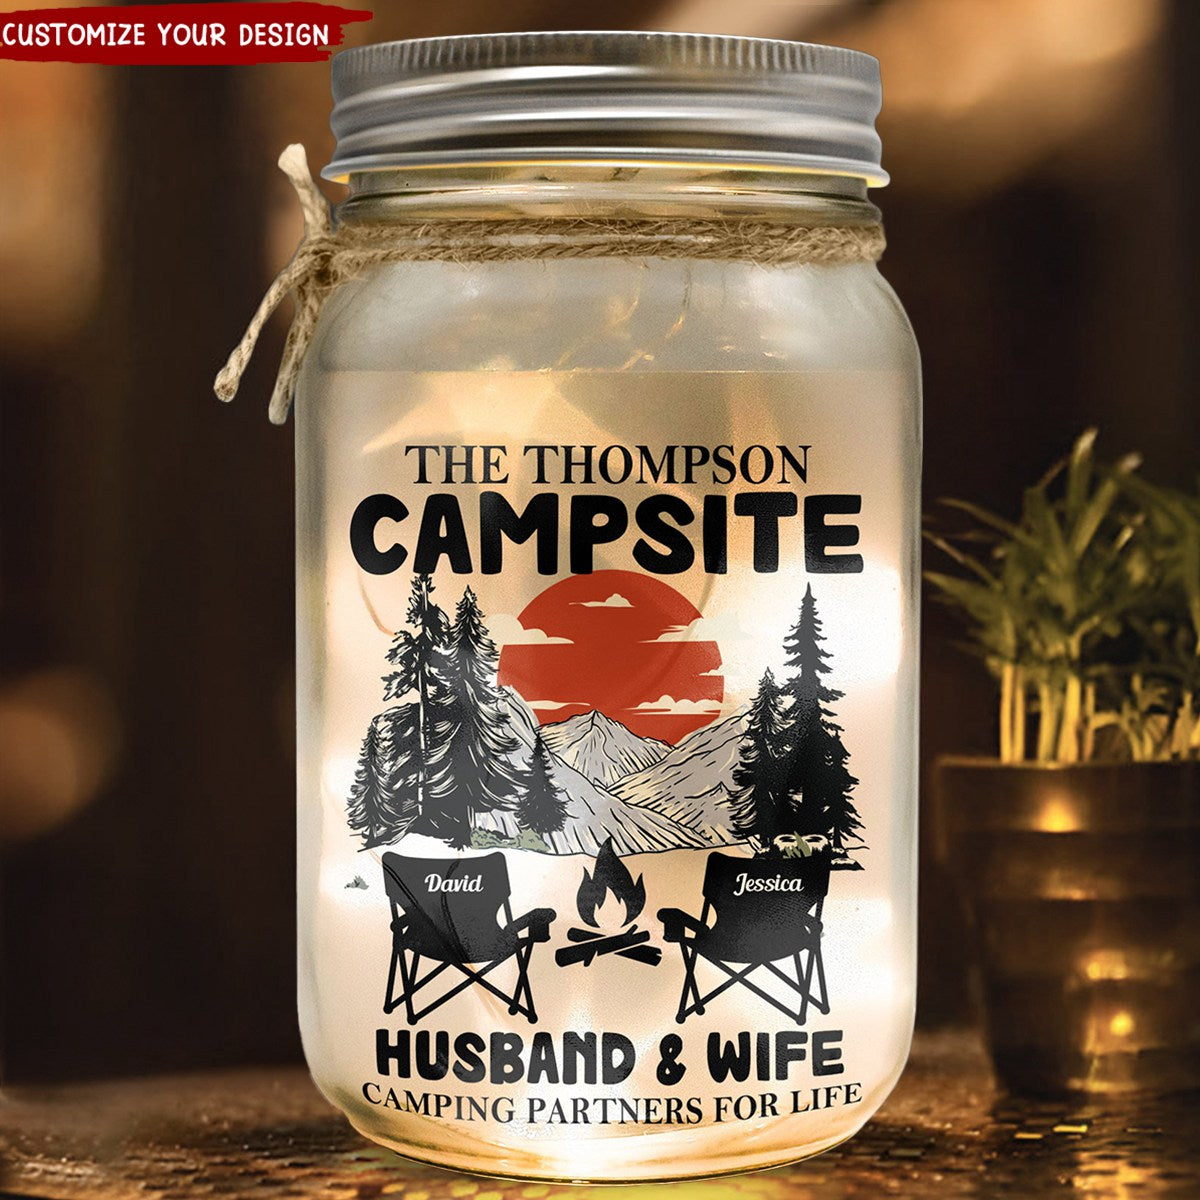 Husband & Wife Camping Partners For Life - Personalized Mason Jar Light